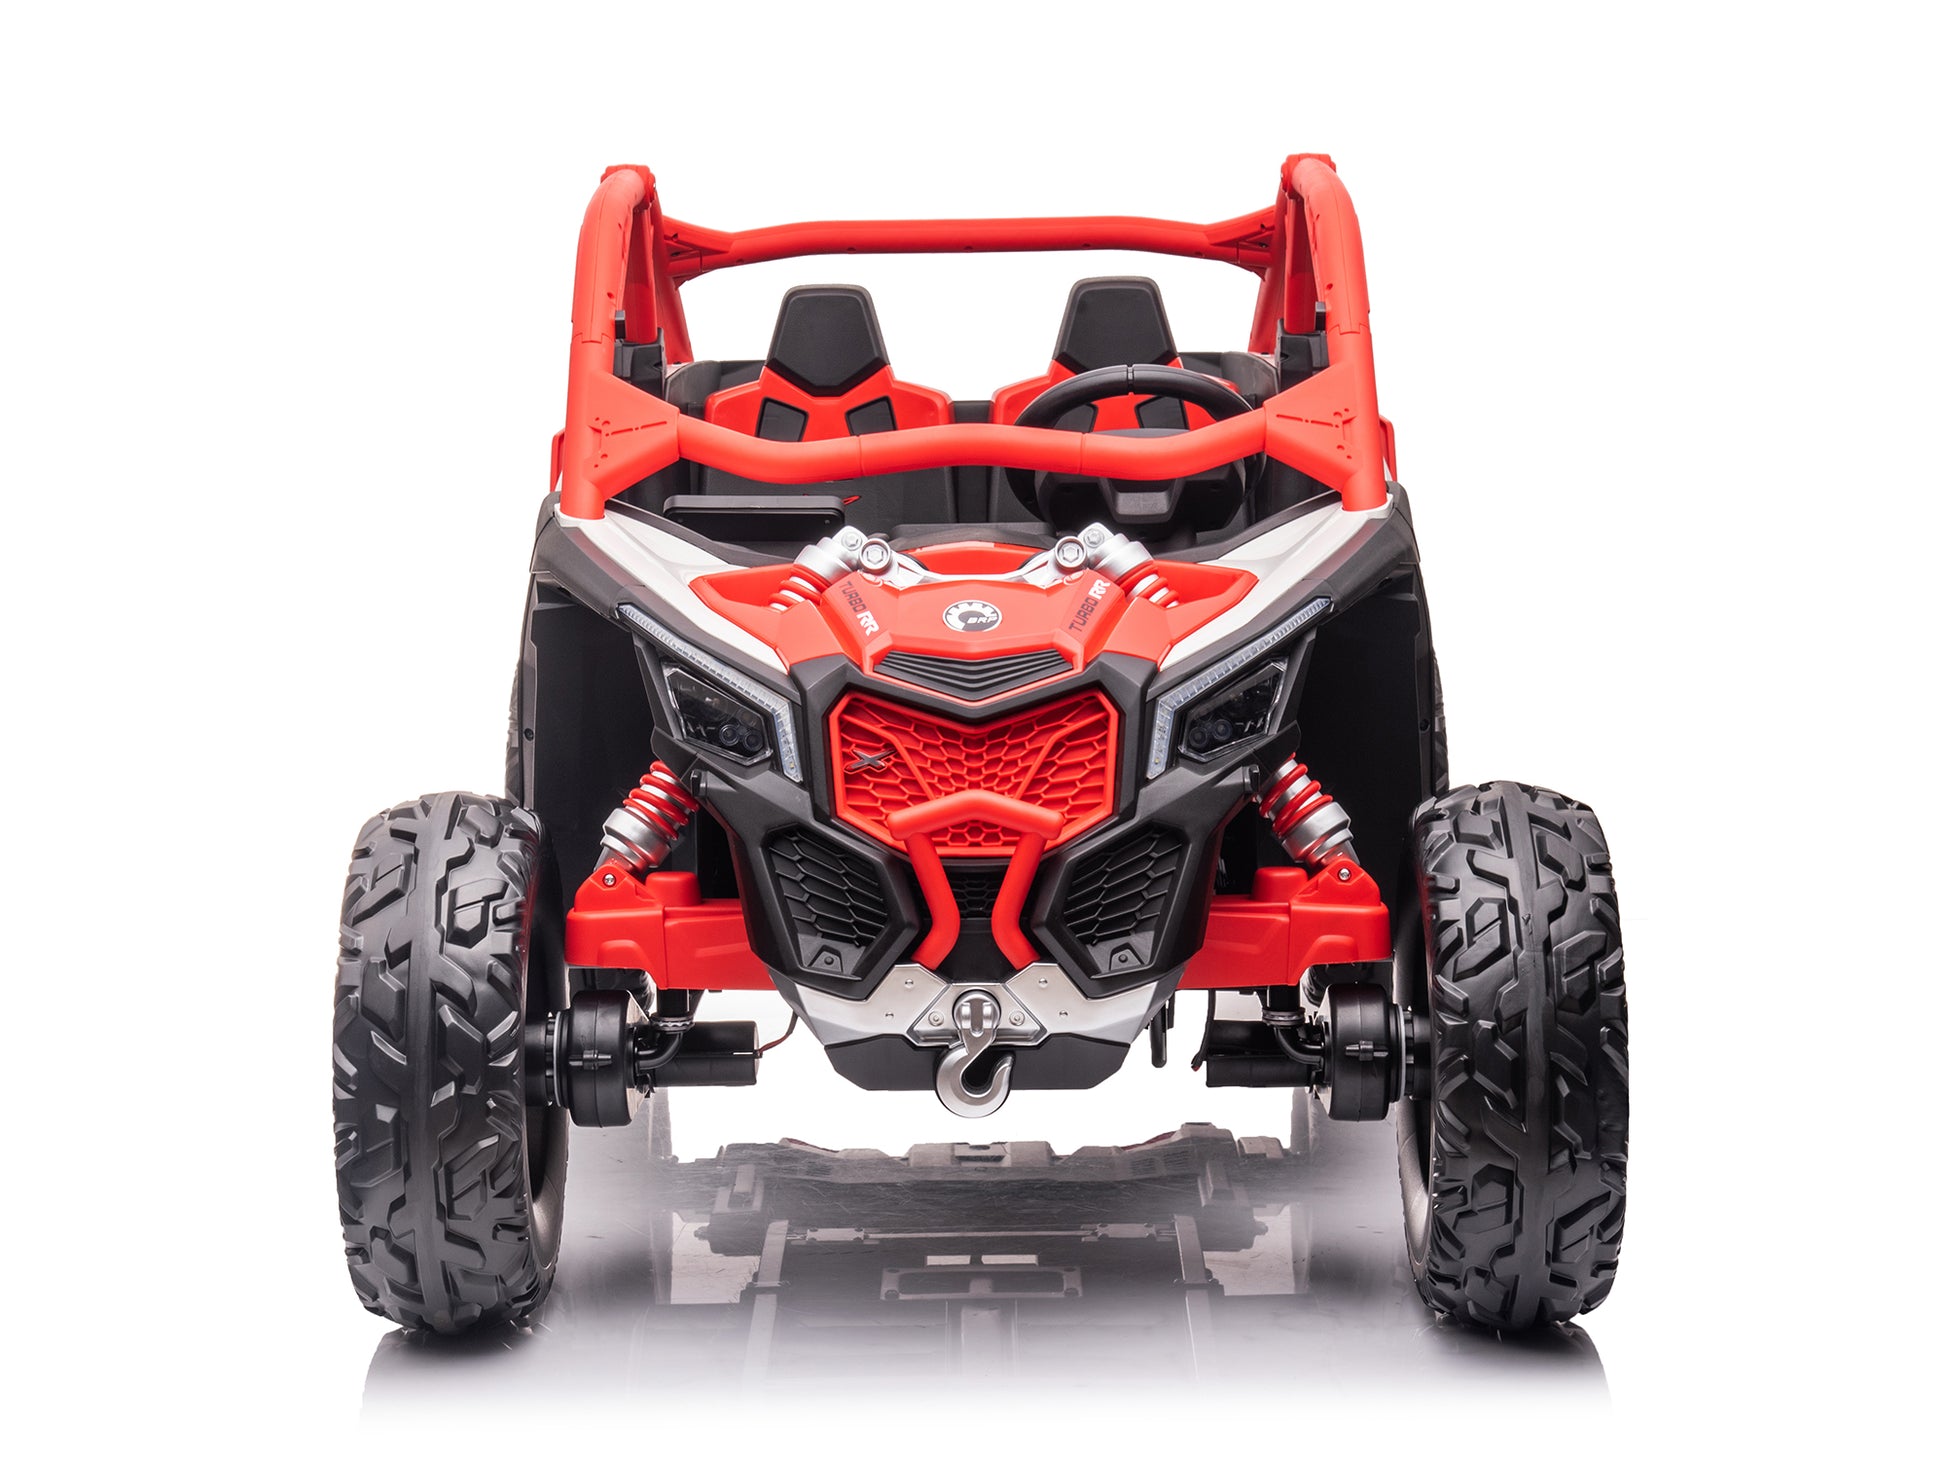 24V Can-Am Maverick X3 Kids Ride-On Buggy - Red – Big Toys Direct